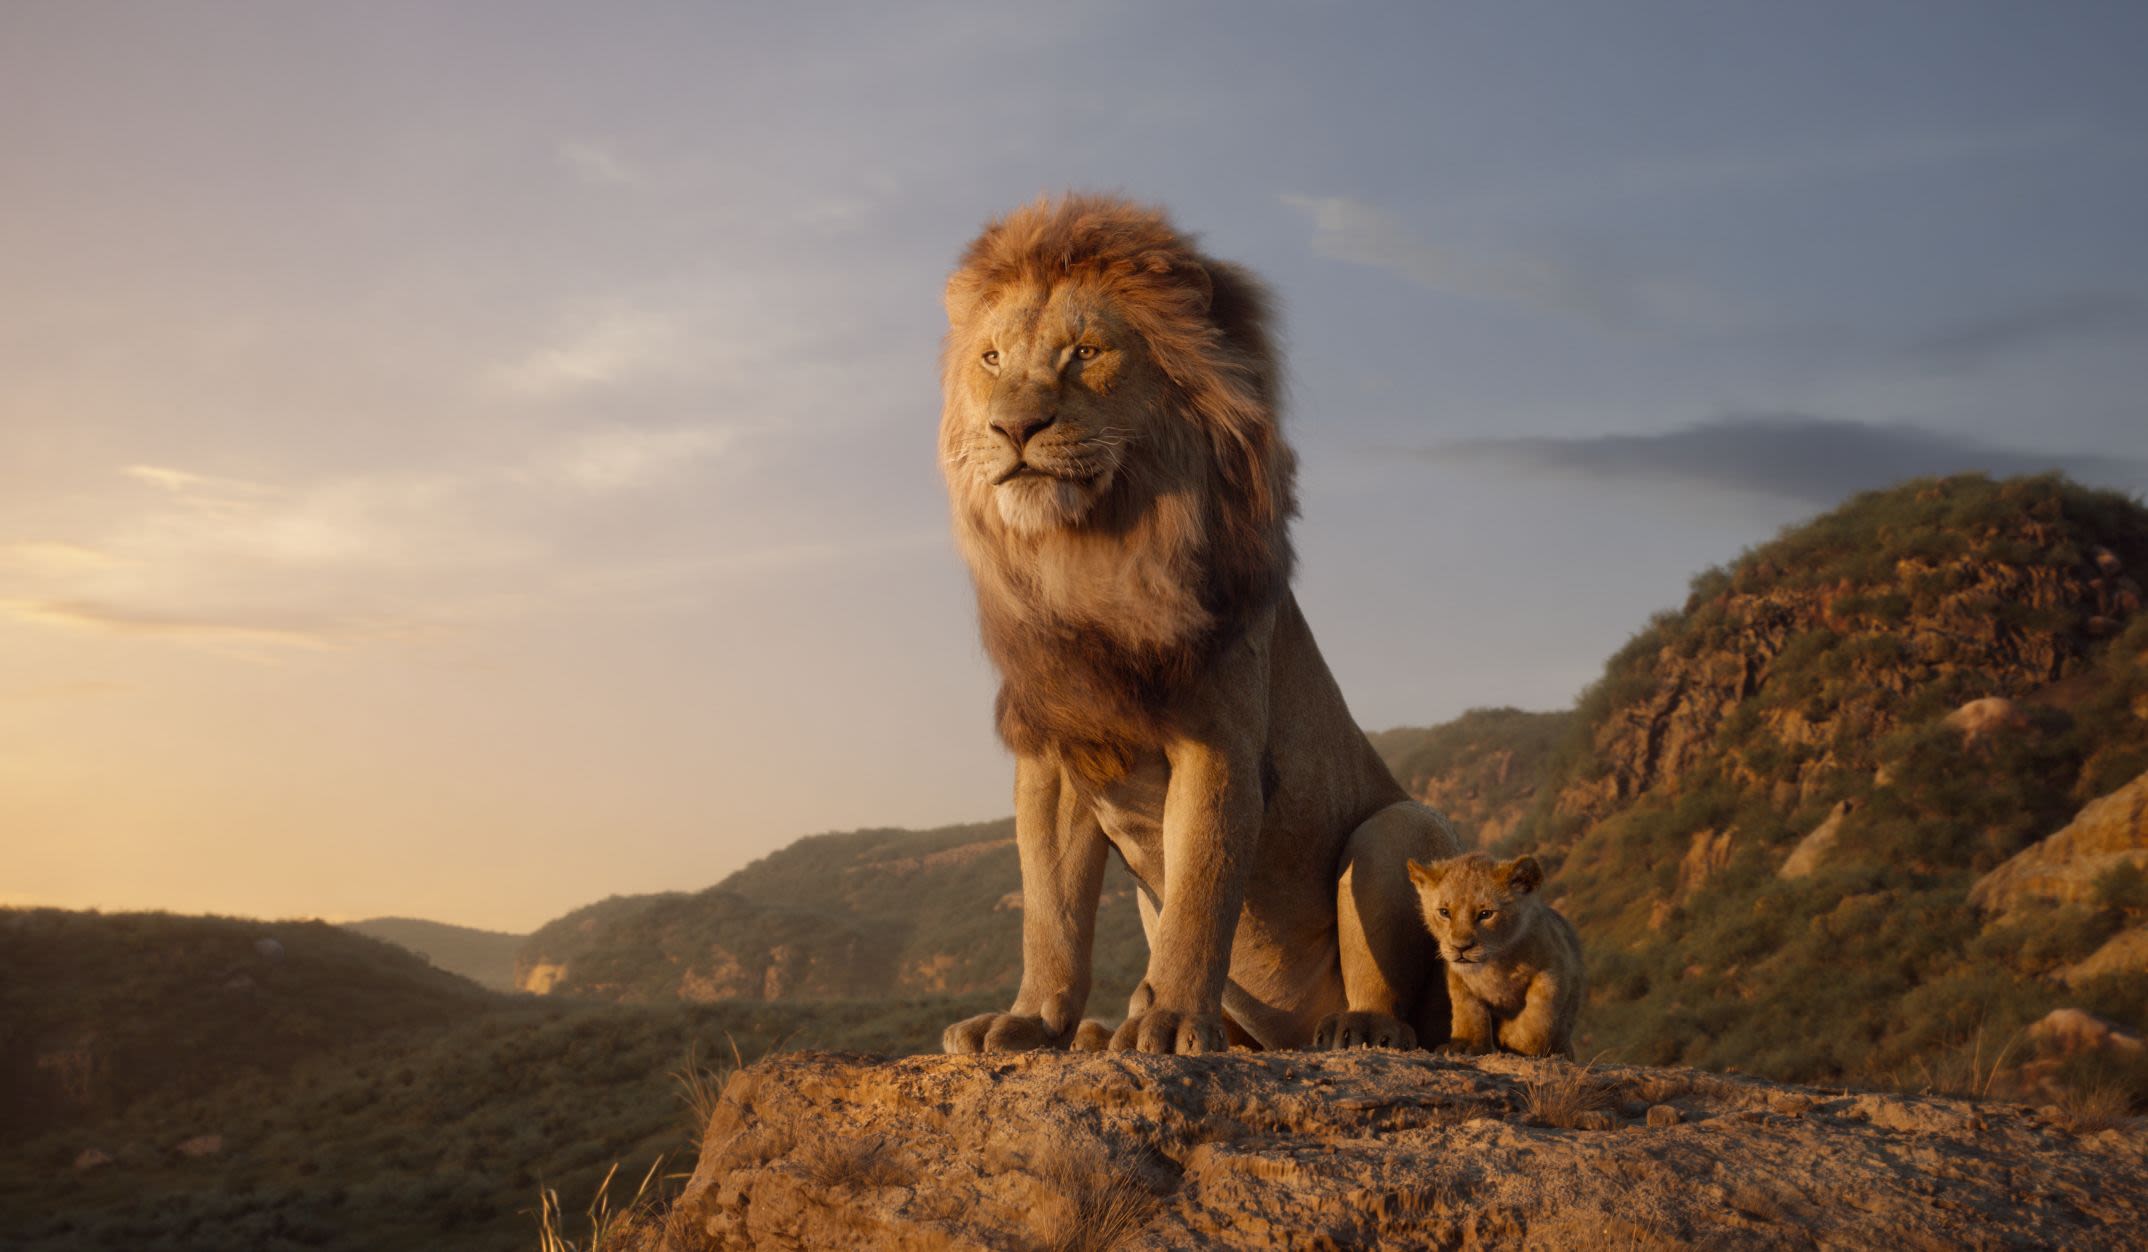 The Lion King' roars into Disney realm of animals just like us | CNN